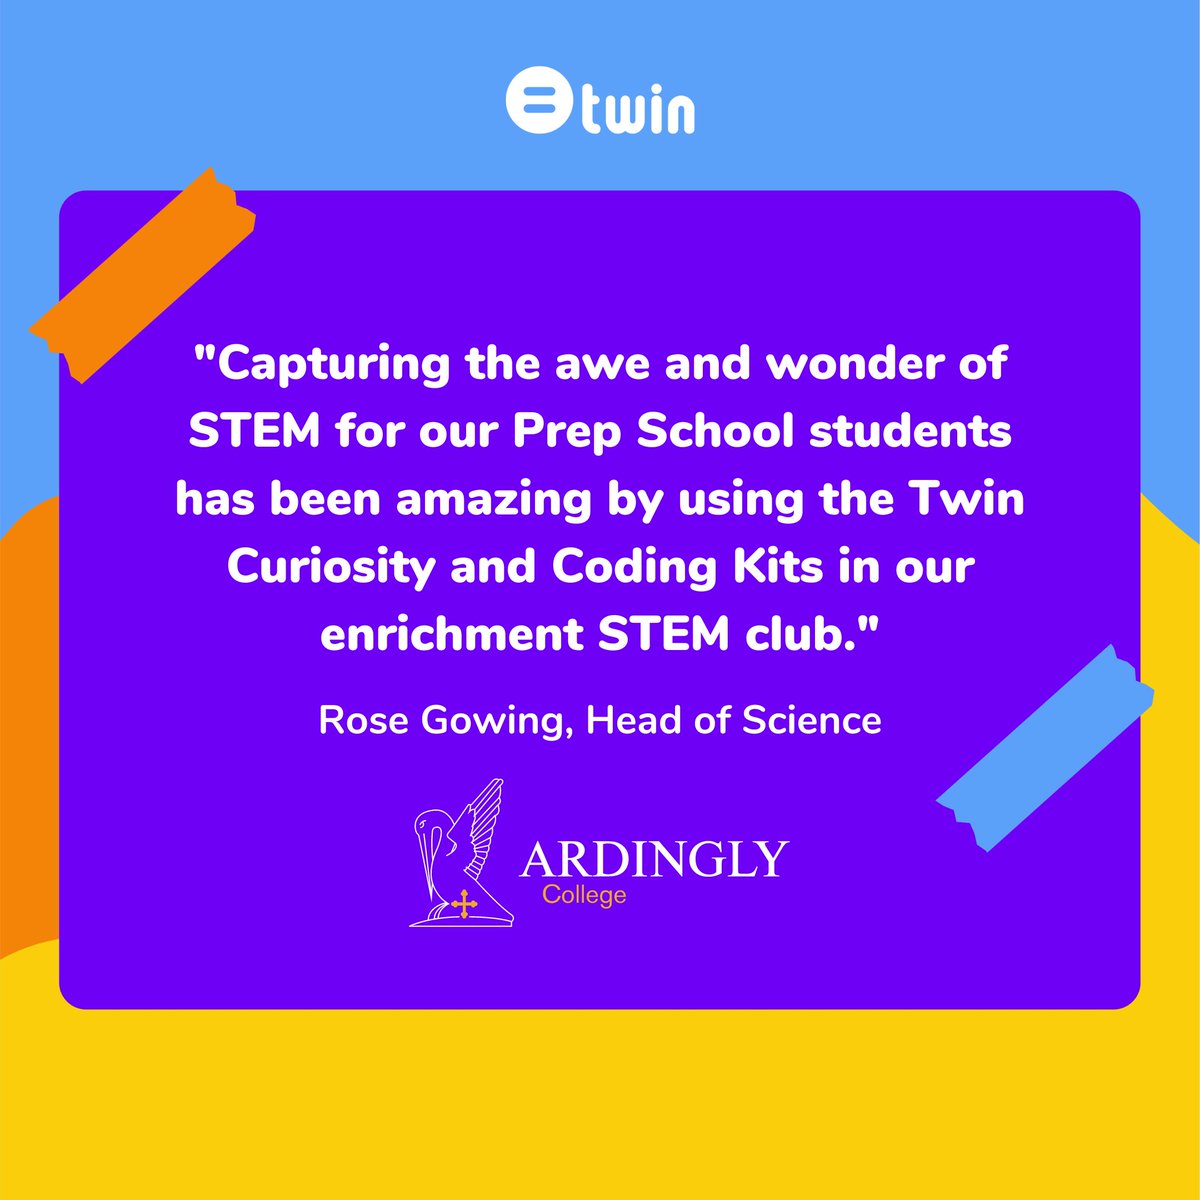 🤝 We're so excited to join forces with @ArdinglyCollege Seeing the students progress through their #STEMforSustainability projects and use their ingenuity is inspiring!
 
#SustainabilityEducation #TeachSDG #Education #EnvironmentalEducation